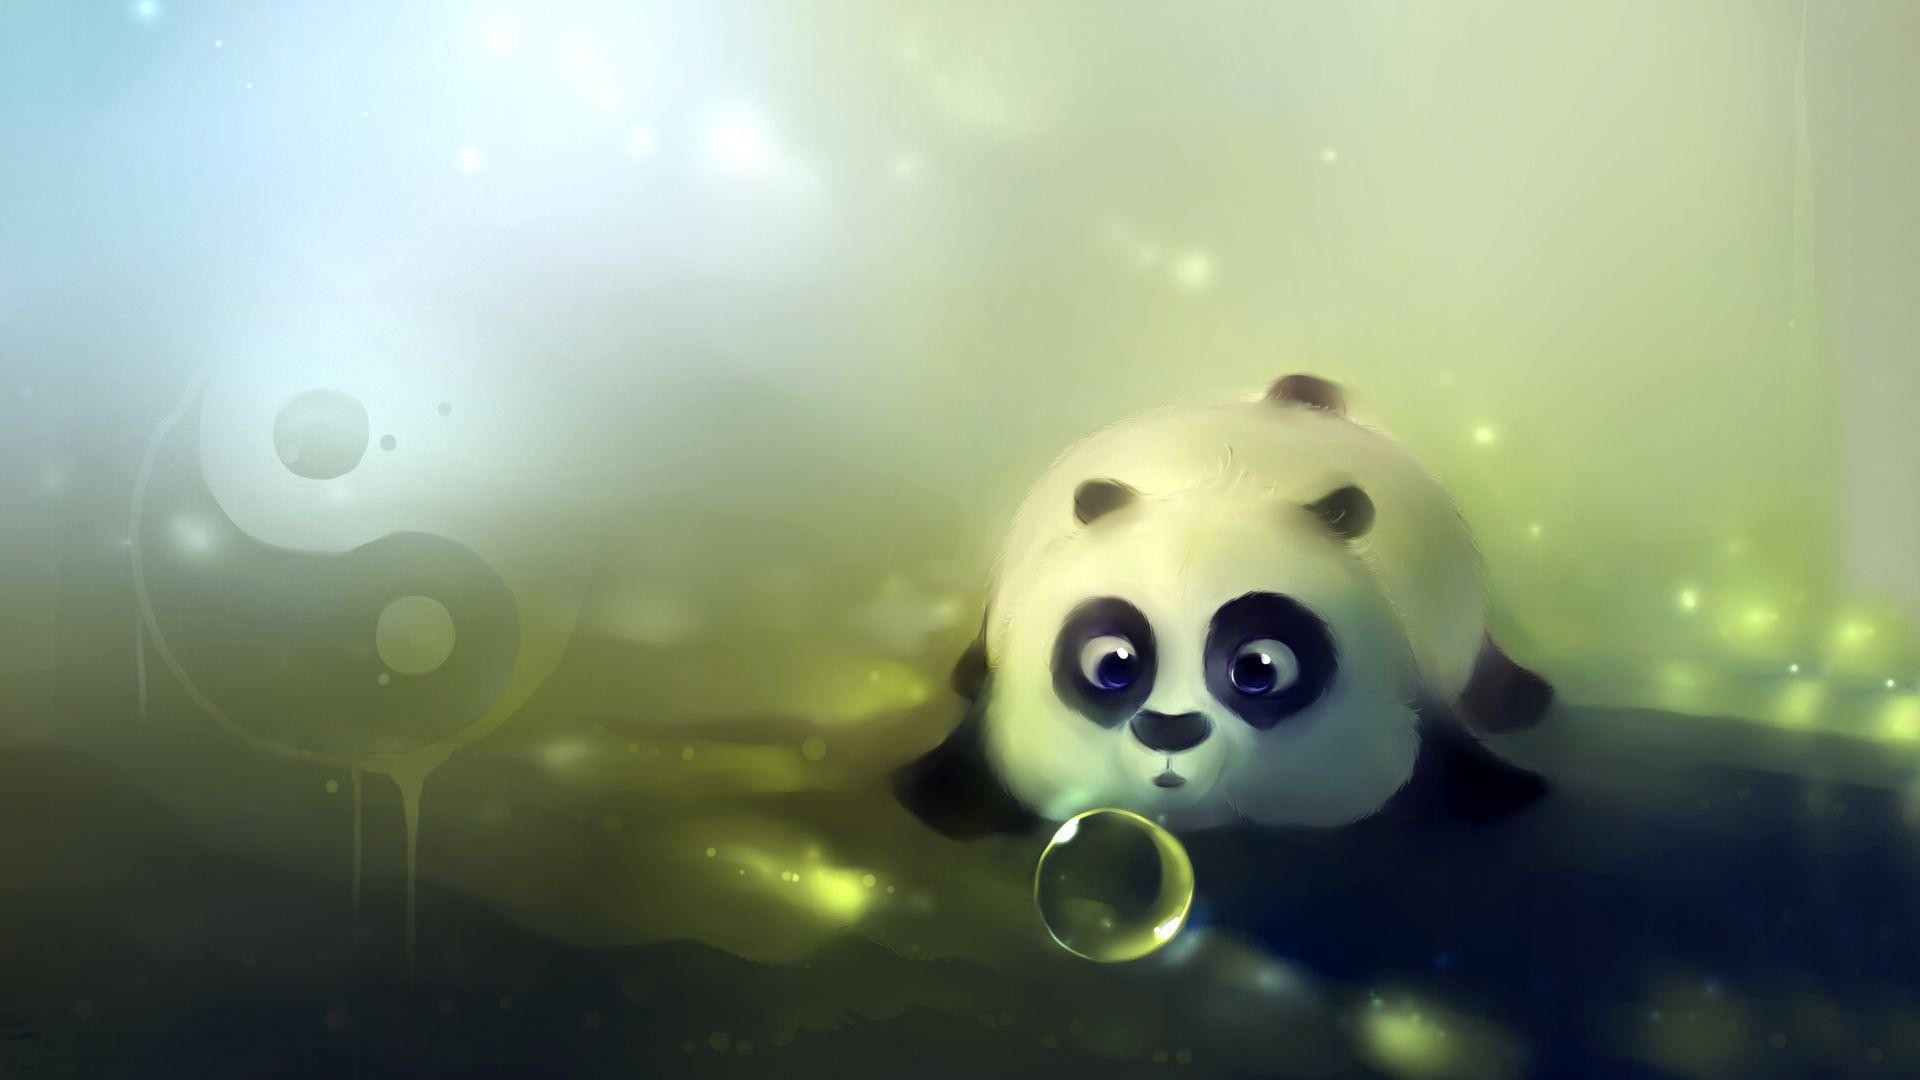 Wallpapers For > Background For Twitter Cute Panda